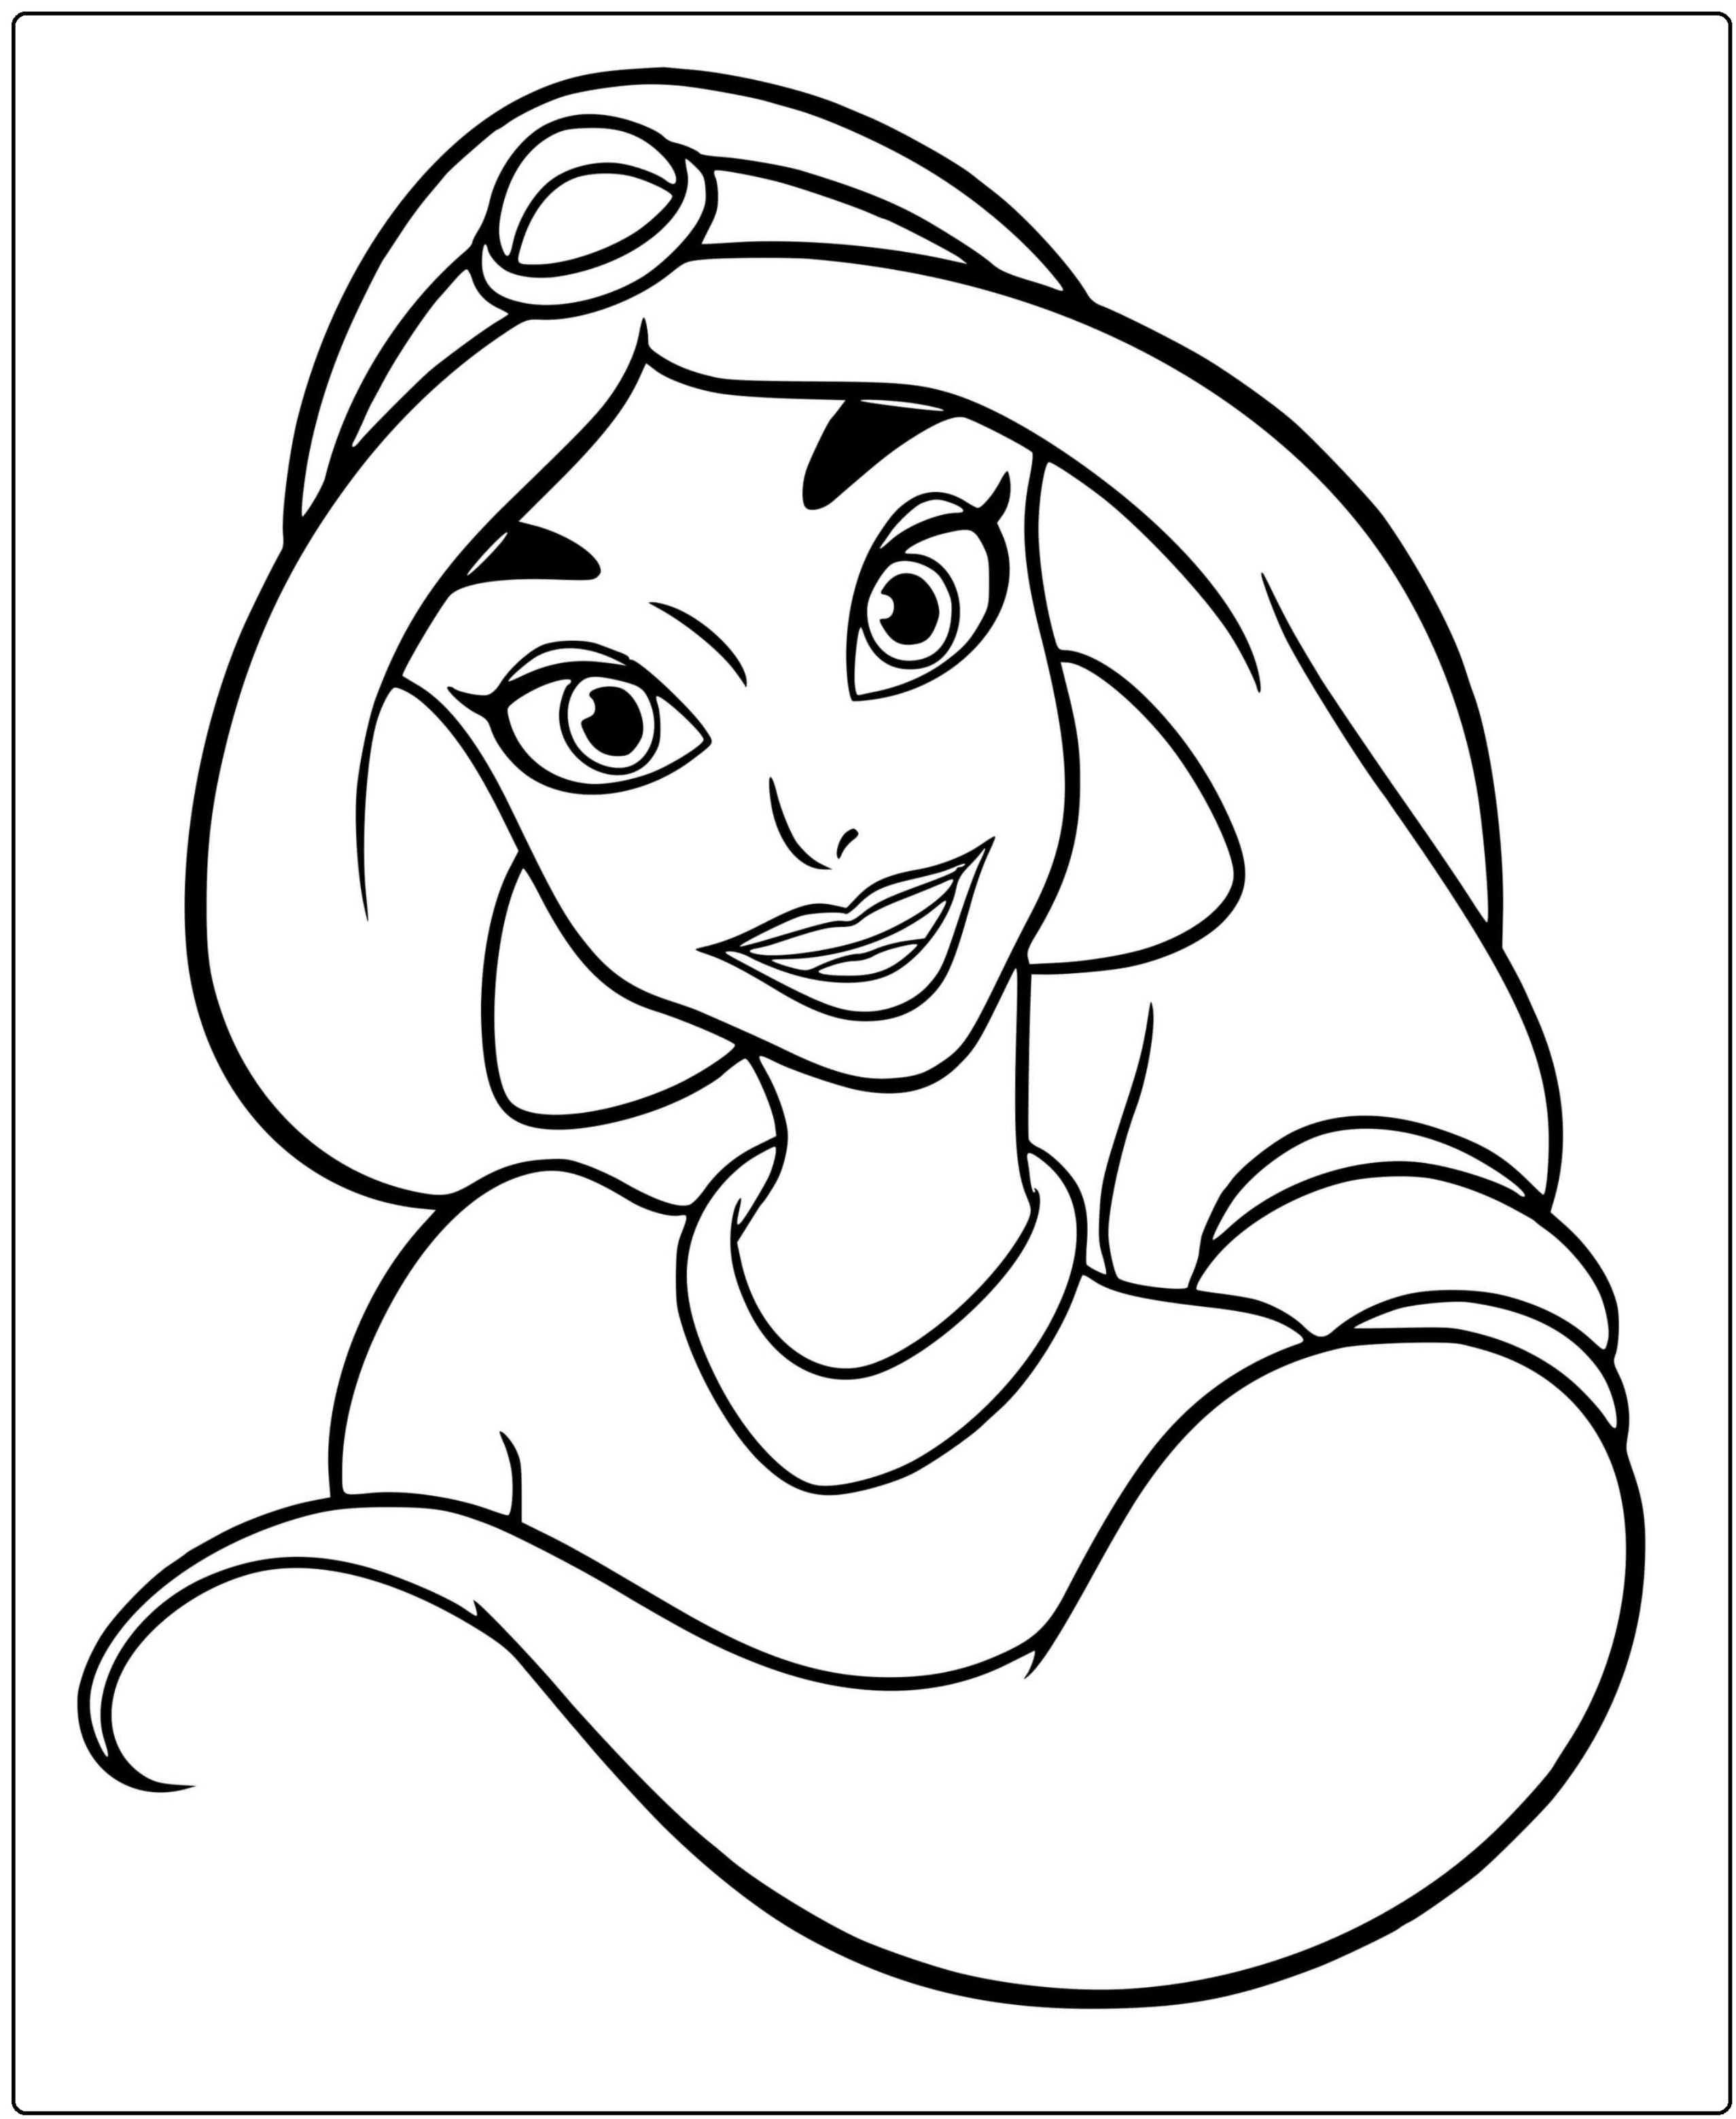 Printable Jasmine black and white  sticker Coloring Page for kids.